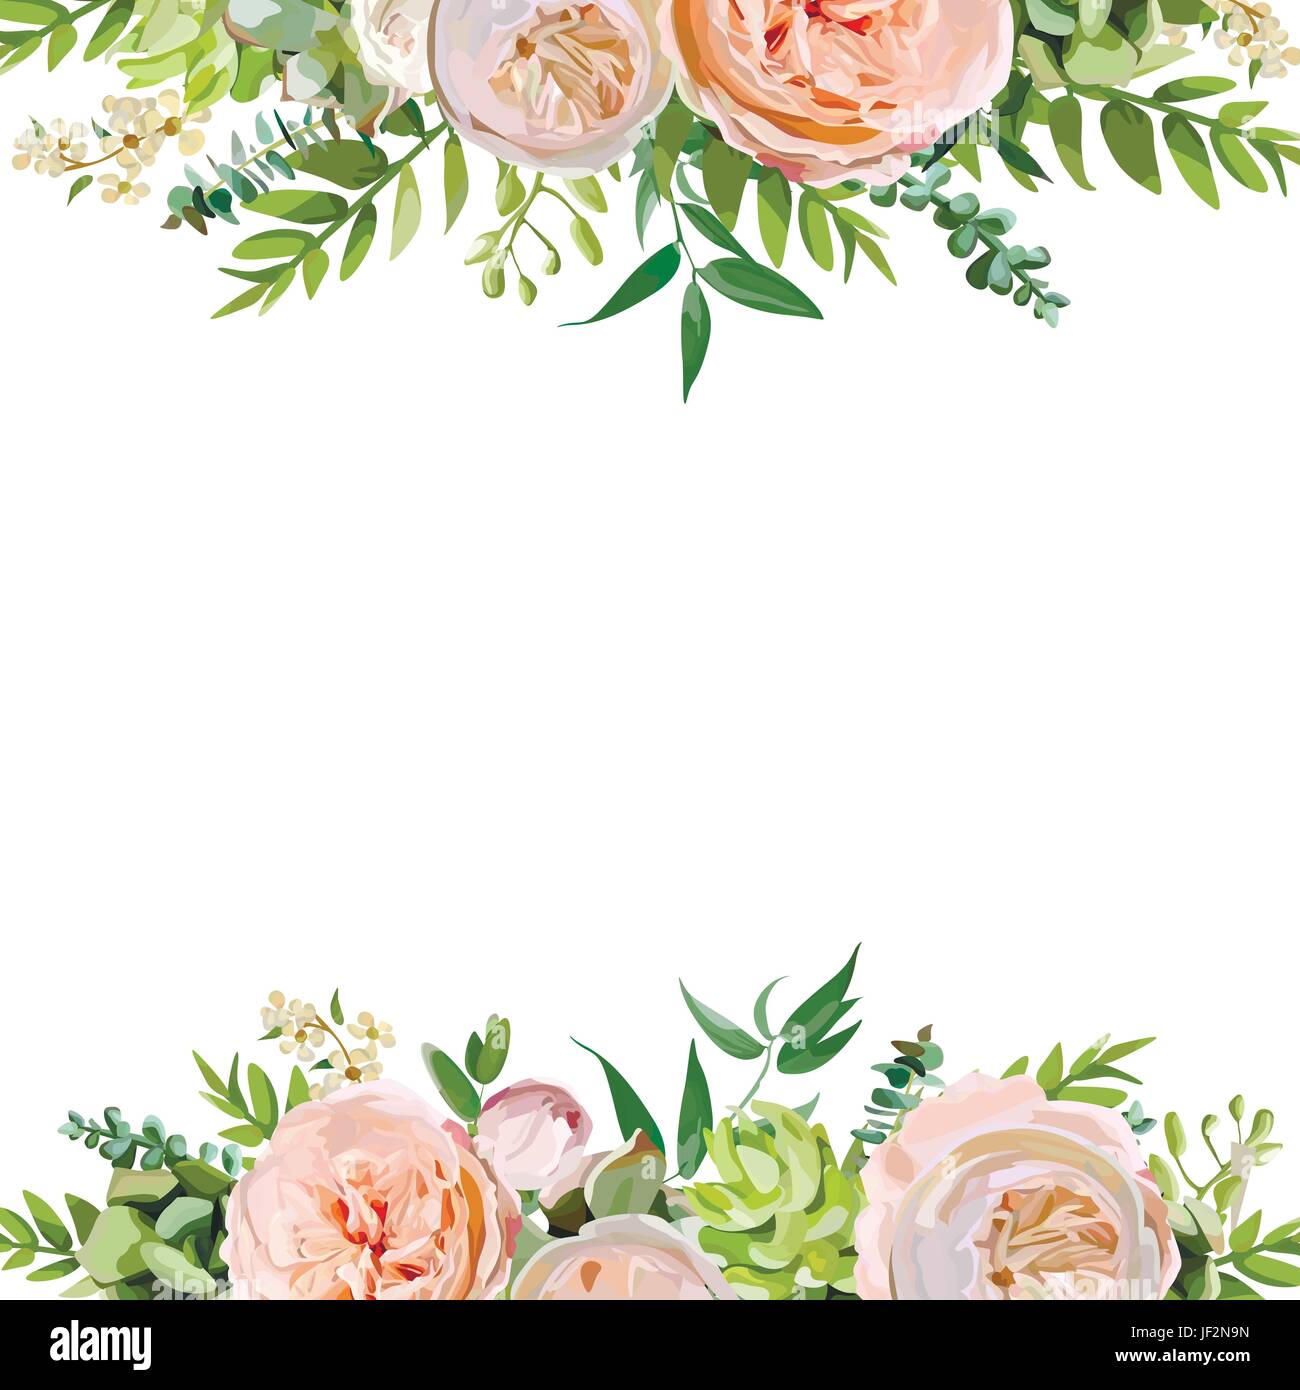 Vector floral design square card design. Soft pink peach english garden rose, eucalyptus green fern leaves mix. Greeting delicate wedding invitation,  Stock Vector